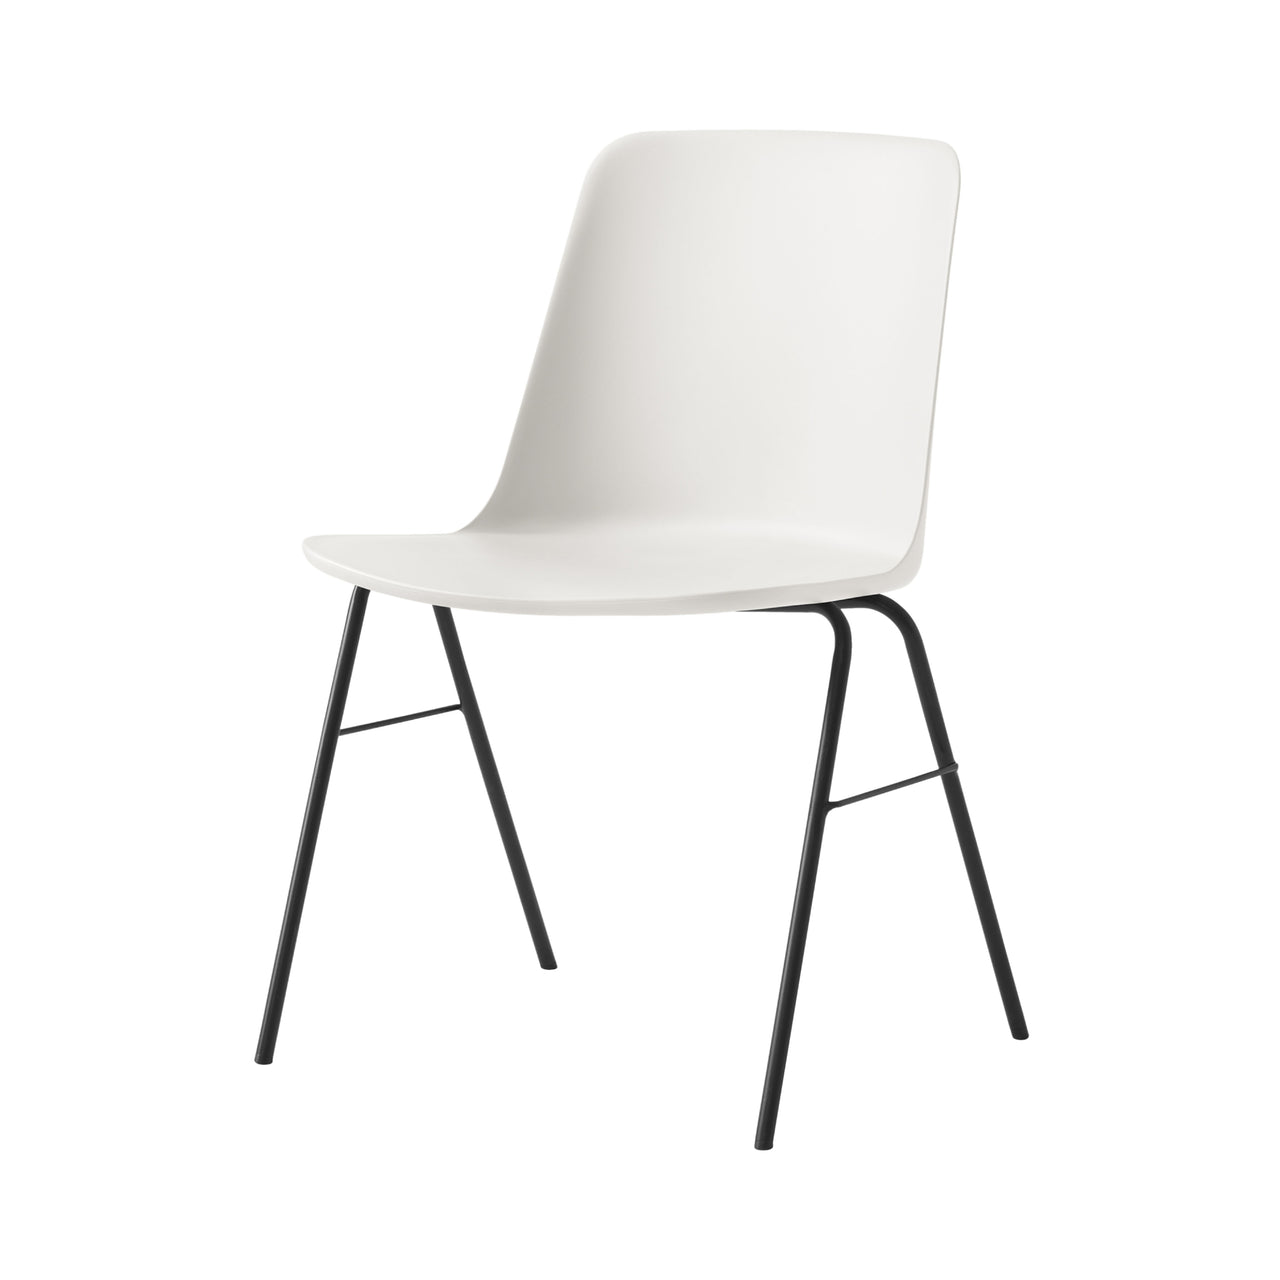 Rely Chair HW26: White + Black